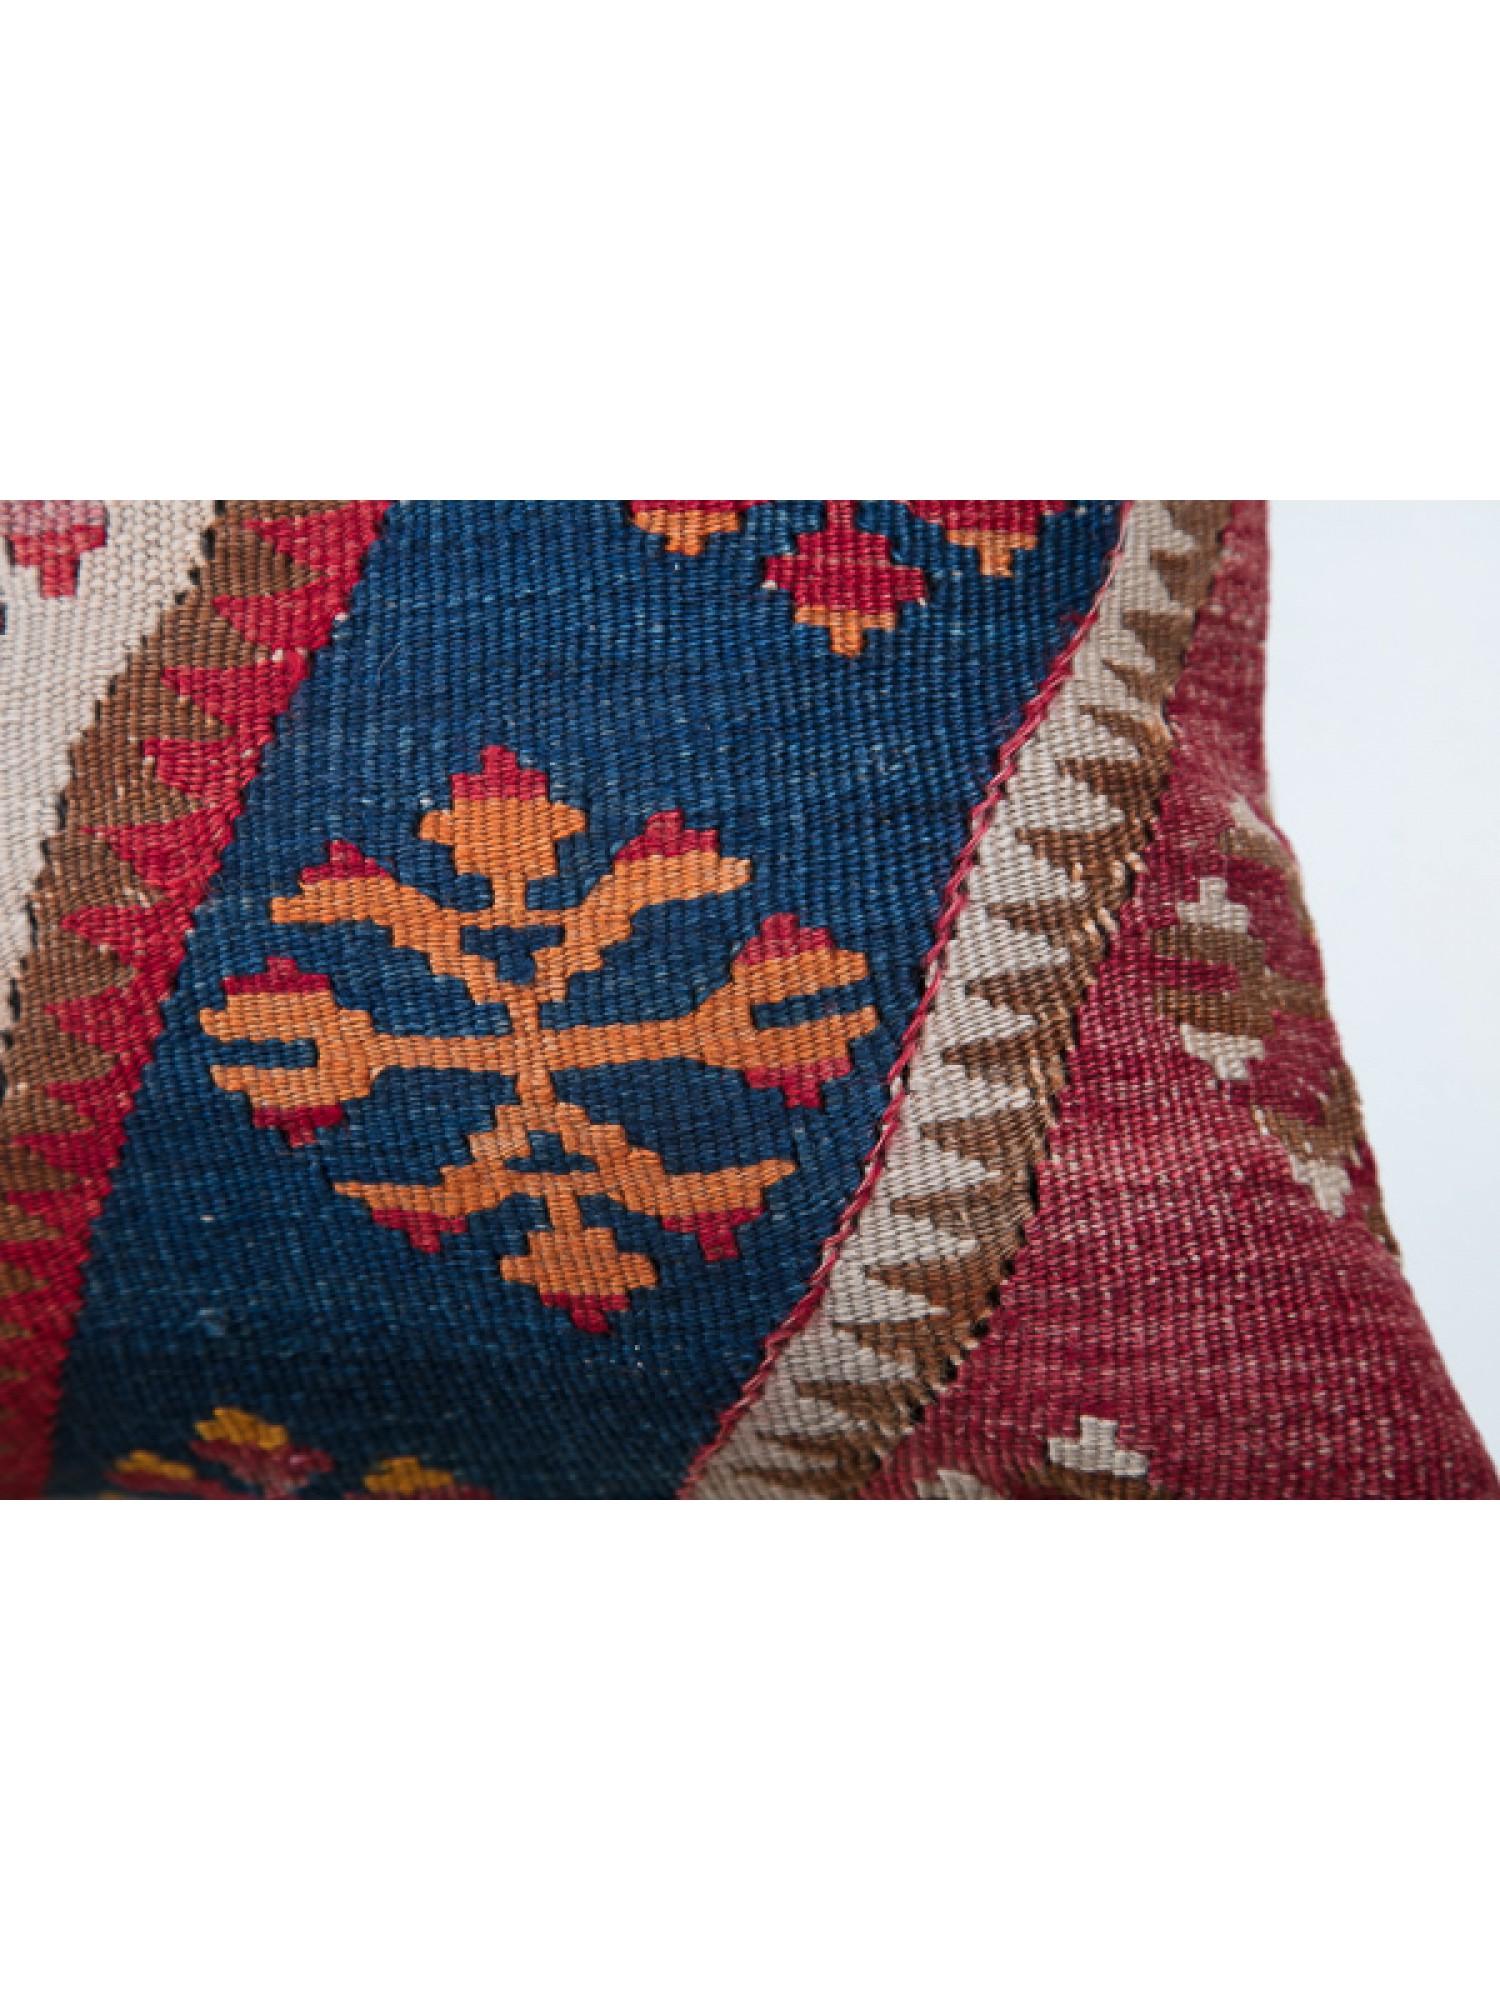 Contemporary Antique & Old Kilim Cushion Cover, Anatolian Yastik Turkish Modern Pillow KC3482 For Sale